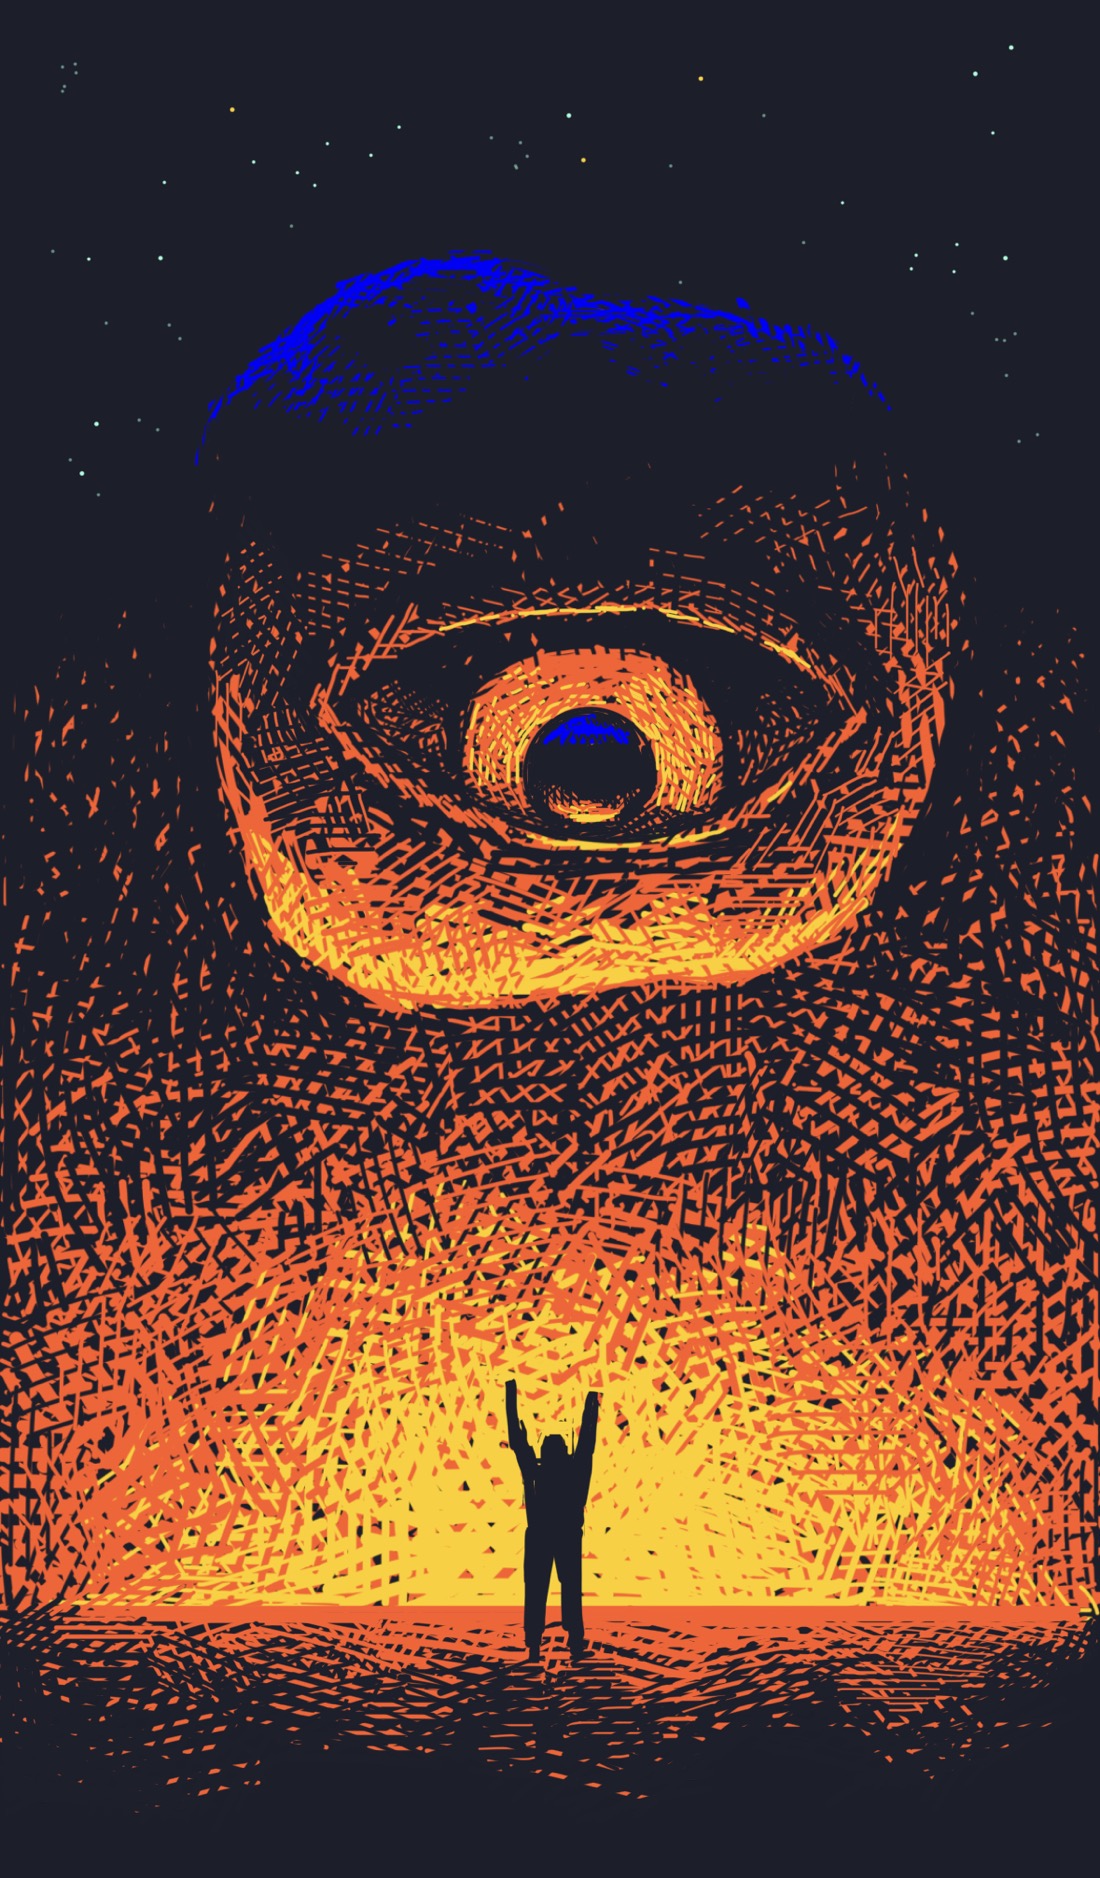 A vast desert plain. Above, the sky is black and starry; below, a light blazes on the horizon, less like a sunset and more like a bonfire. Hanging above the plain is what appears to be an asteroid with a huge eye on it. The eye is looking down at the desert, where a tiny figure stands, both arms raised, seemingly signaling to it.